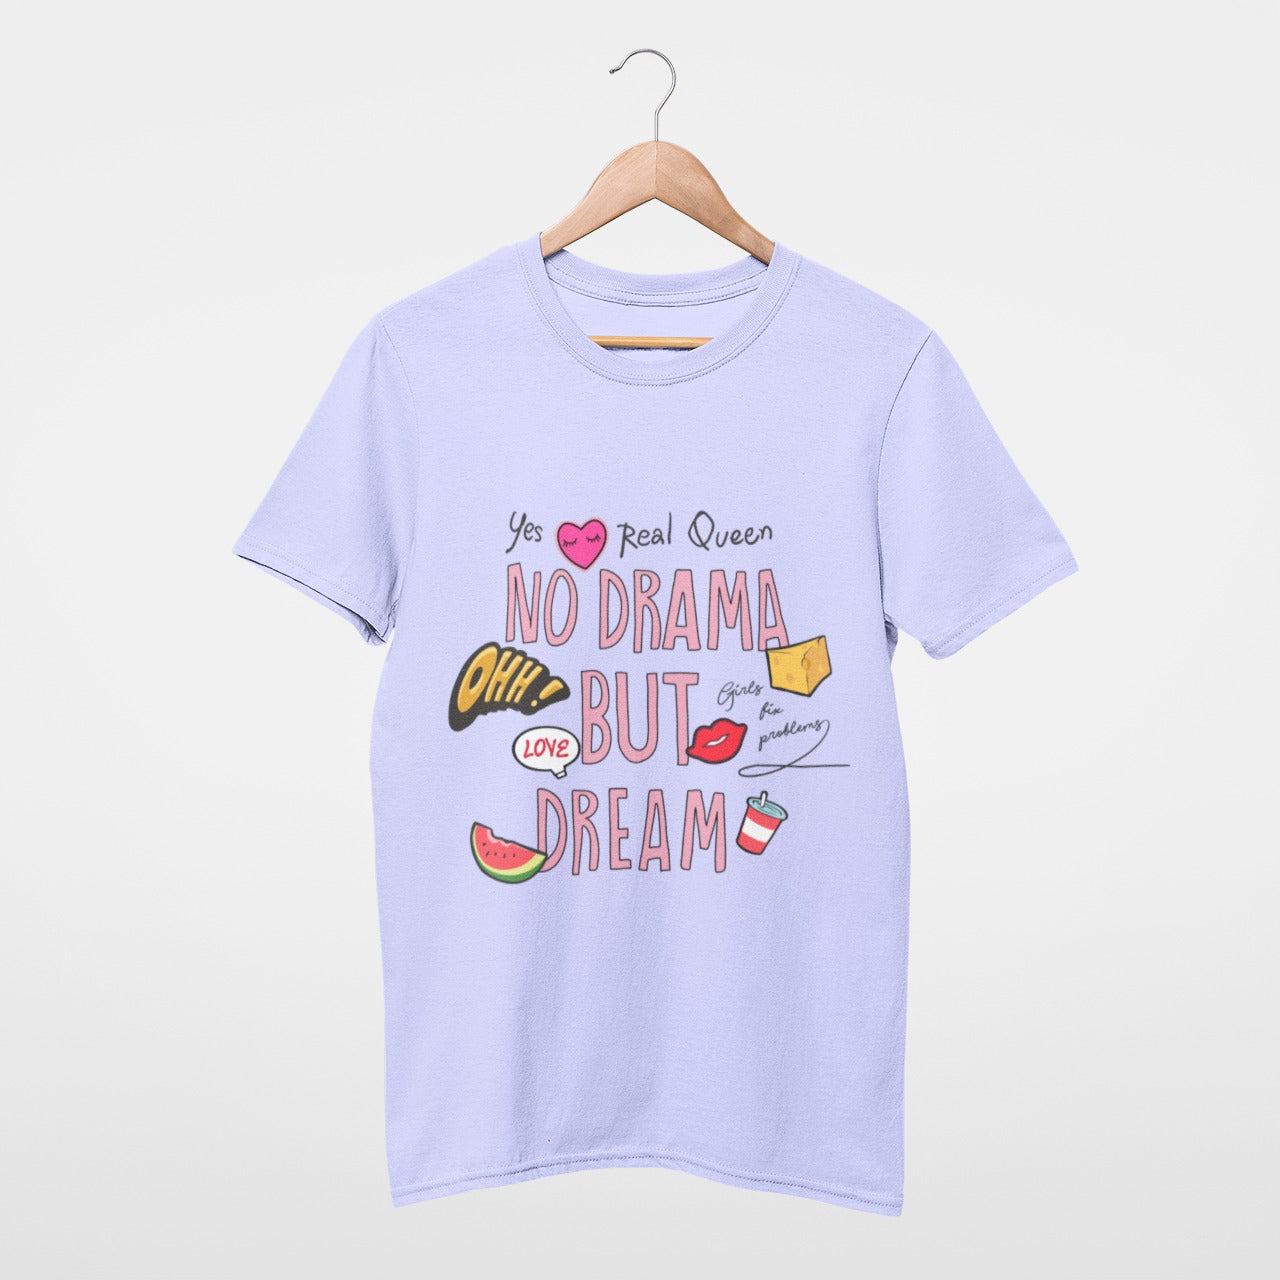 Real Queen, No drama but dream Tee